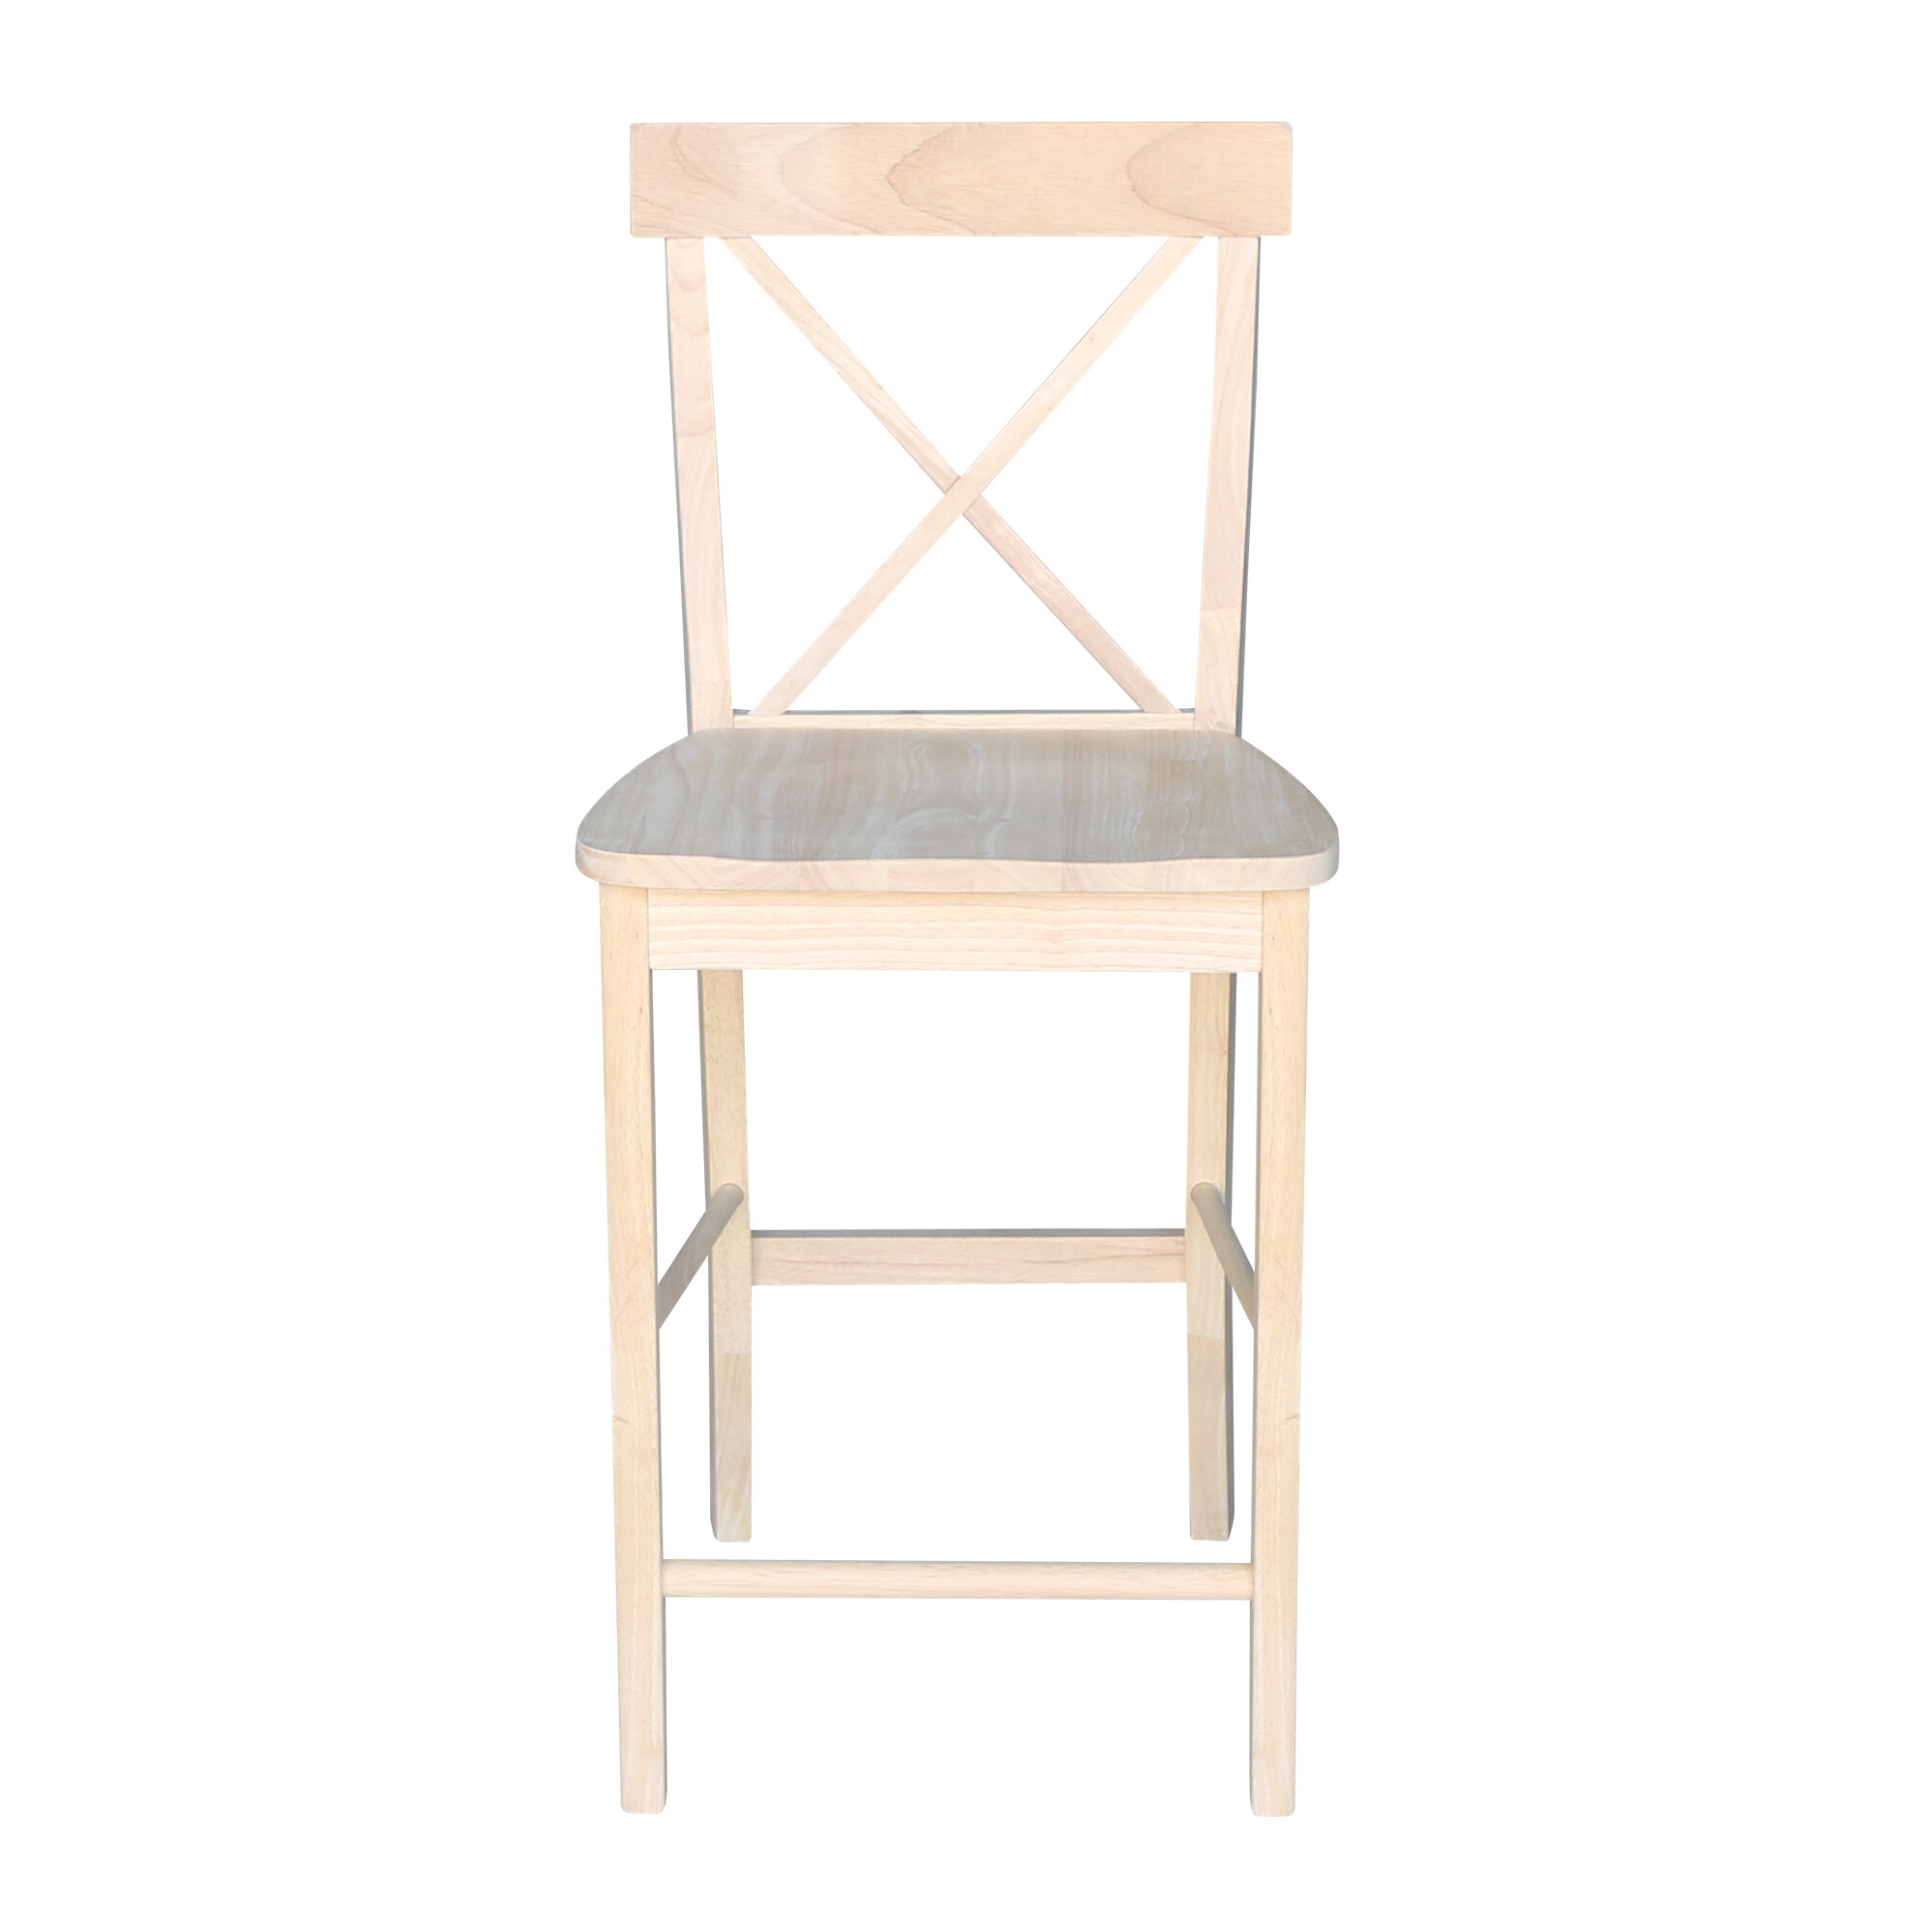 International Concepts S-202 24-inch Double X Stool Unfinished for sale online 